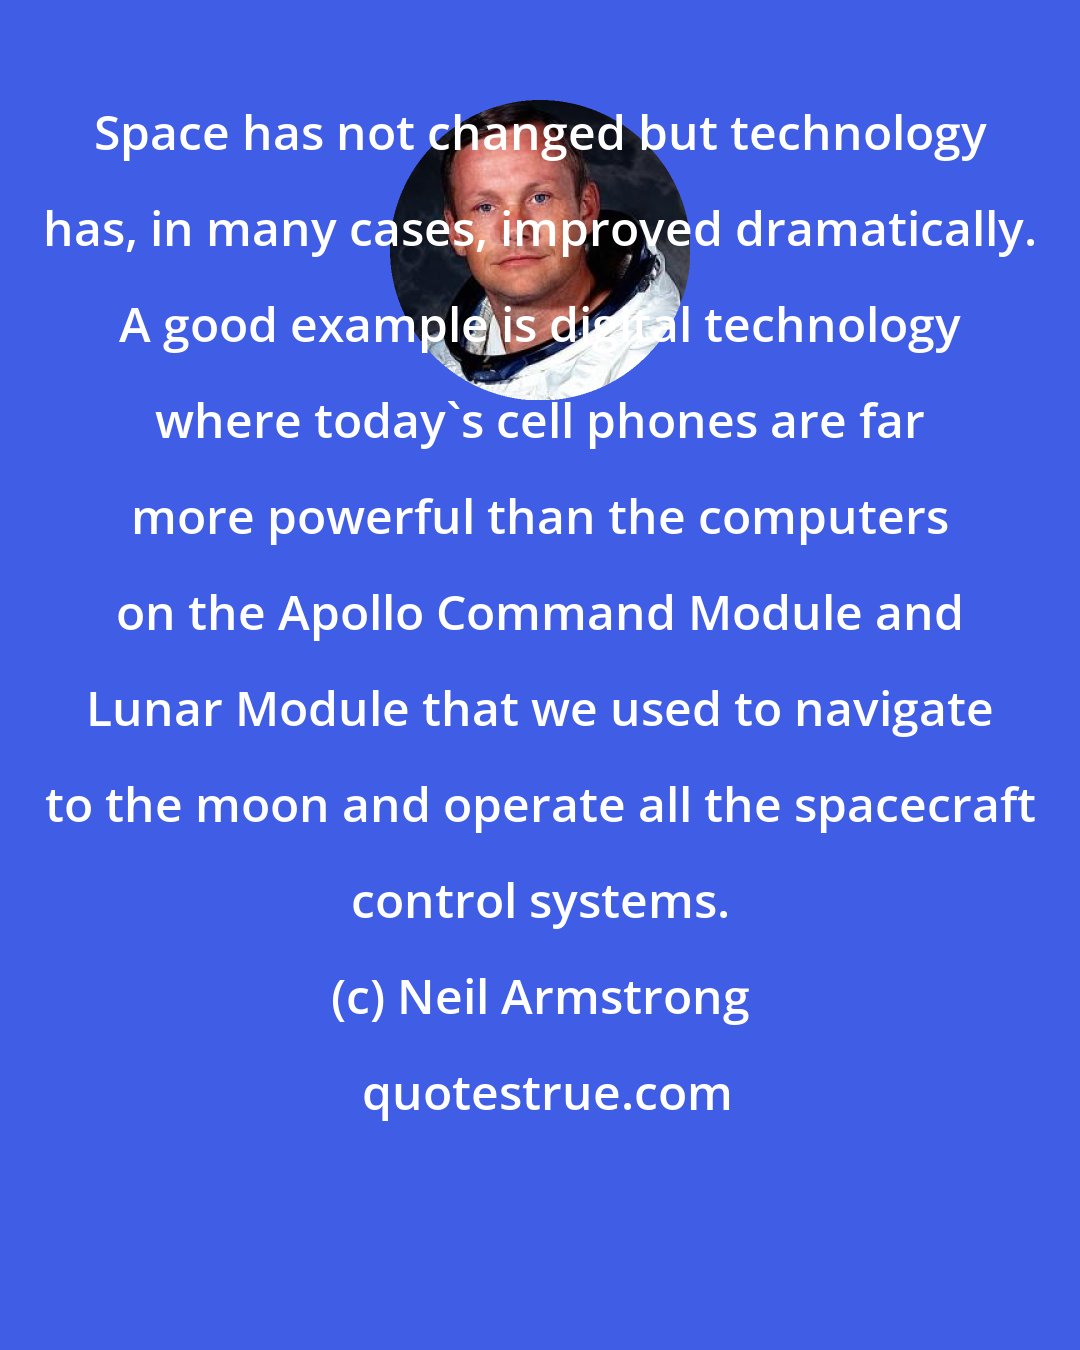 Neil Armstrong: Space has not changed but technology has, in many cases, improved dramatically. A good example is digital technology where today's cell phones are far more powerful than the computers on the Apollo Command Module and Lunar Module that we used to navigate to the moon and operate all the spacecraft control systems.